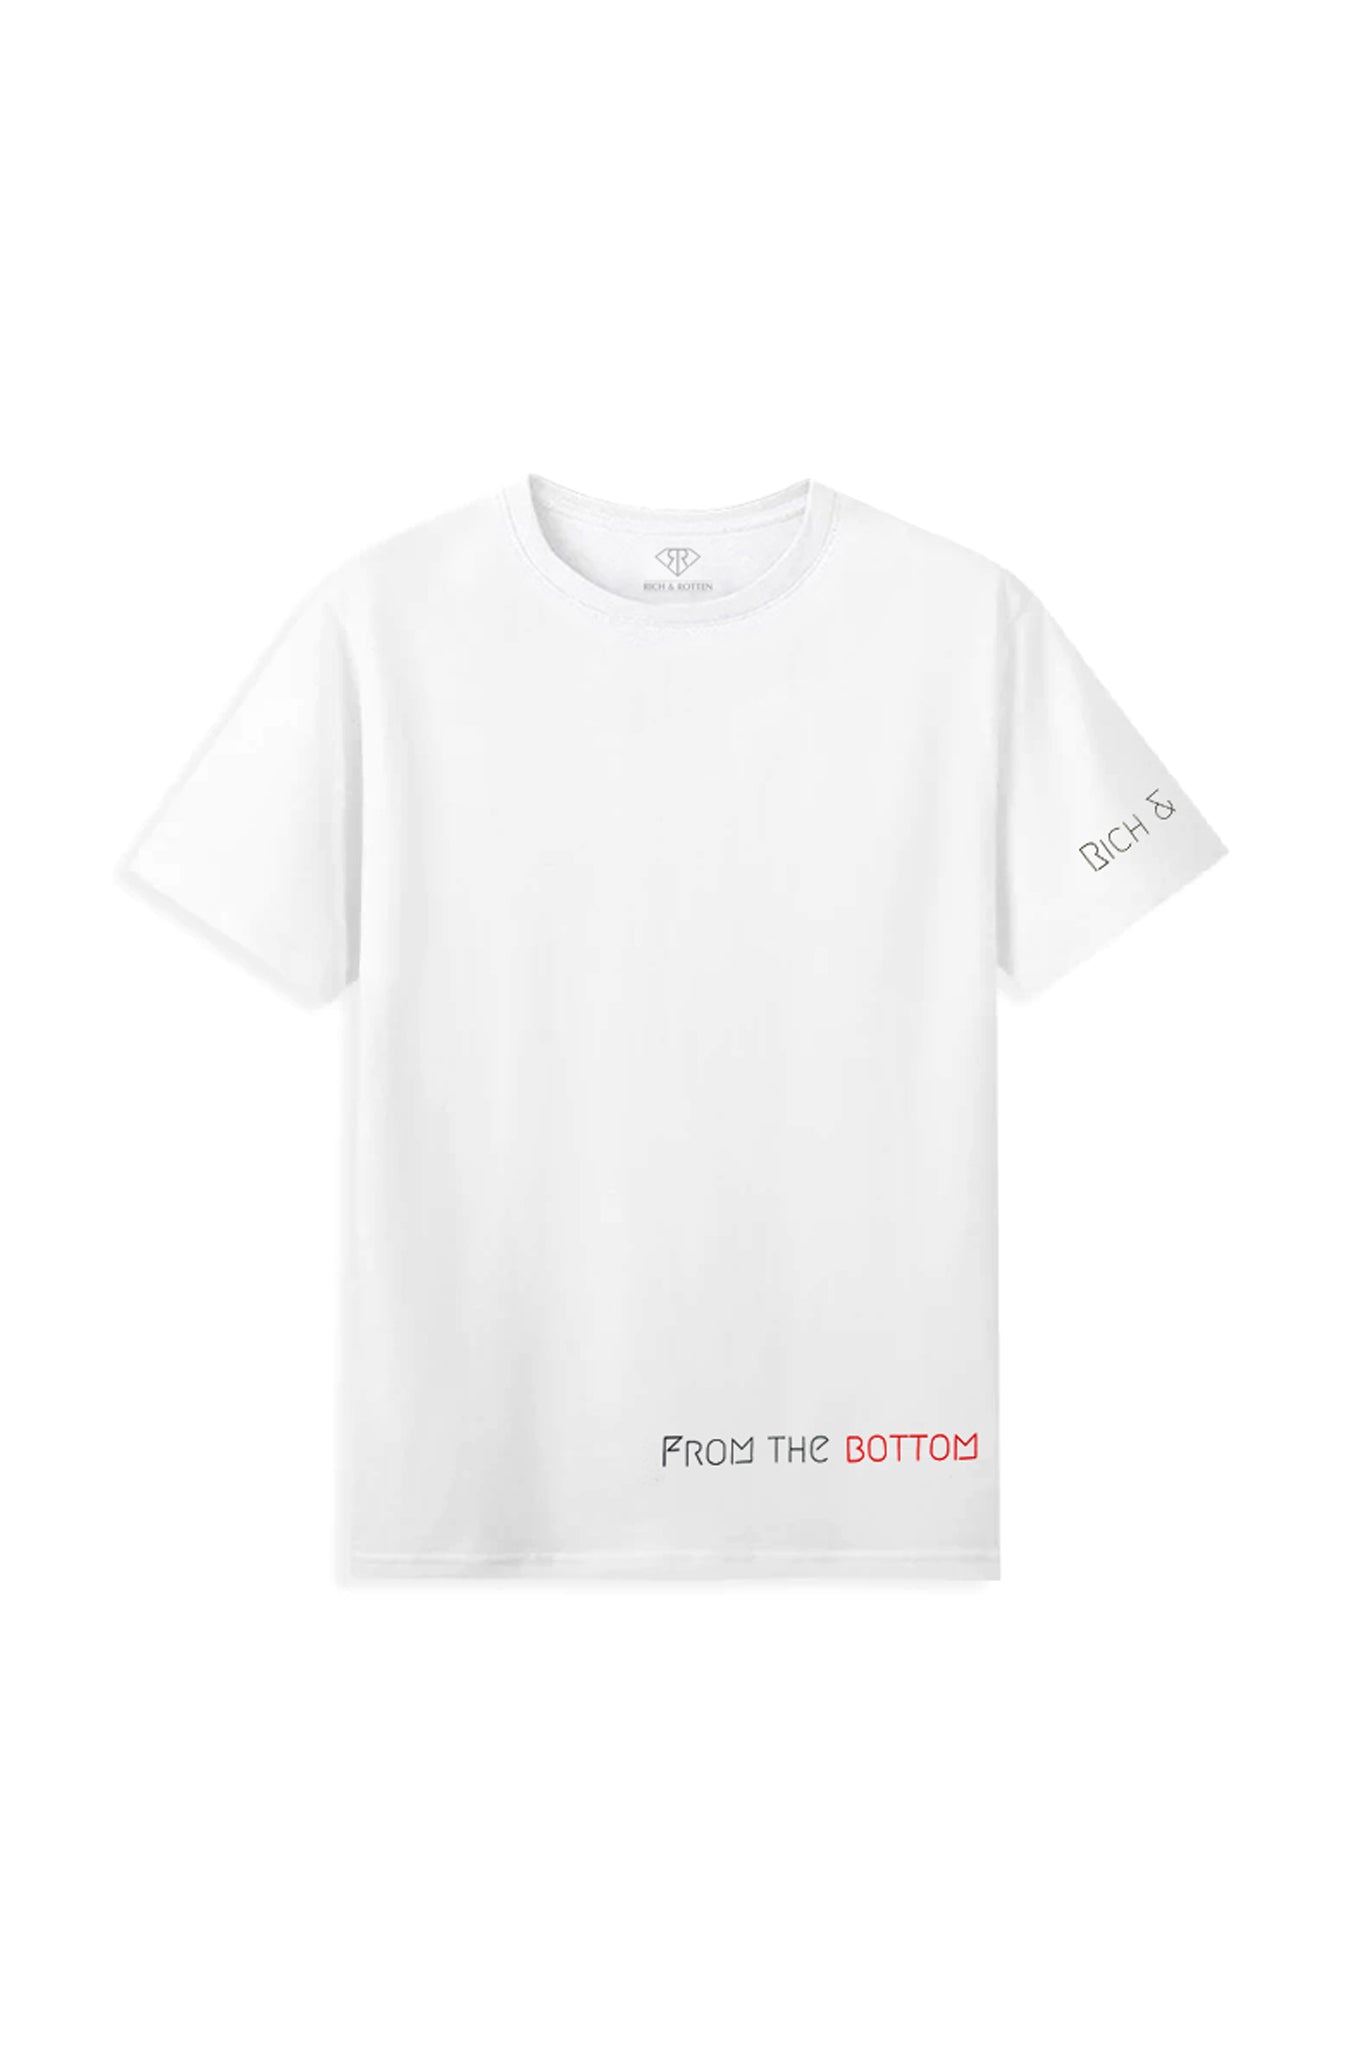 "From the Bottom" Classic Tee